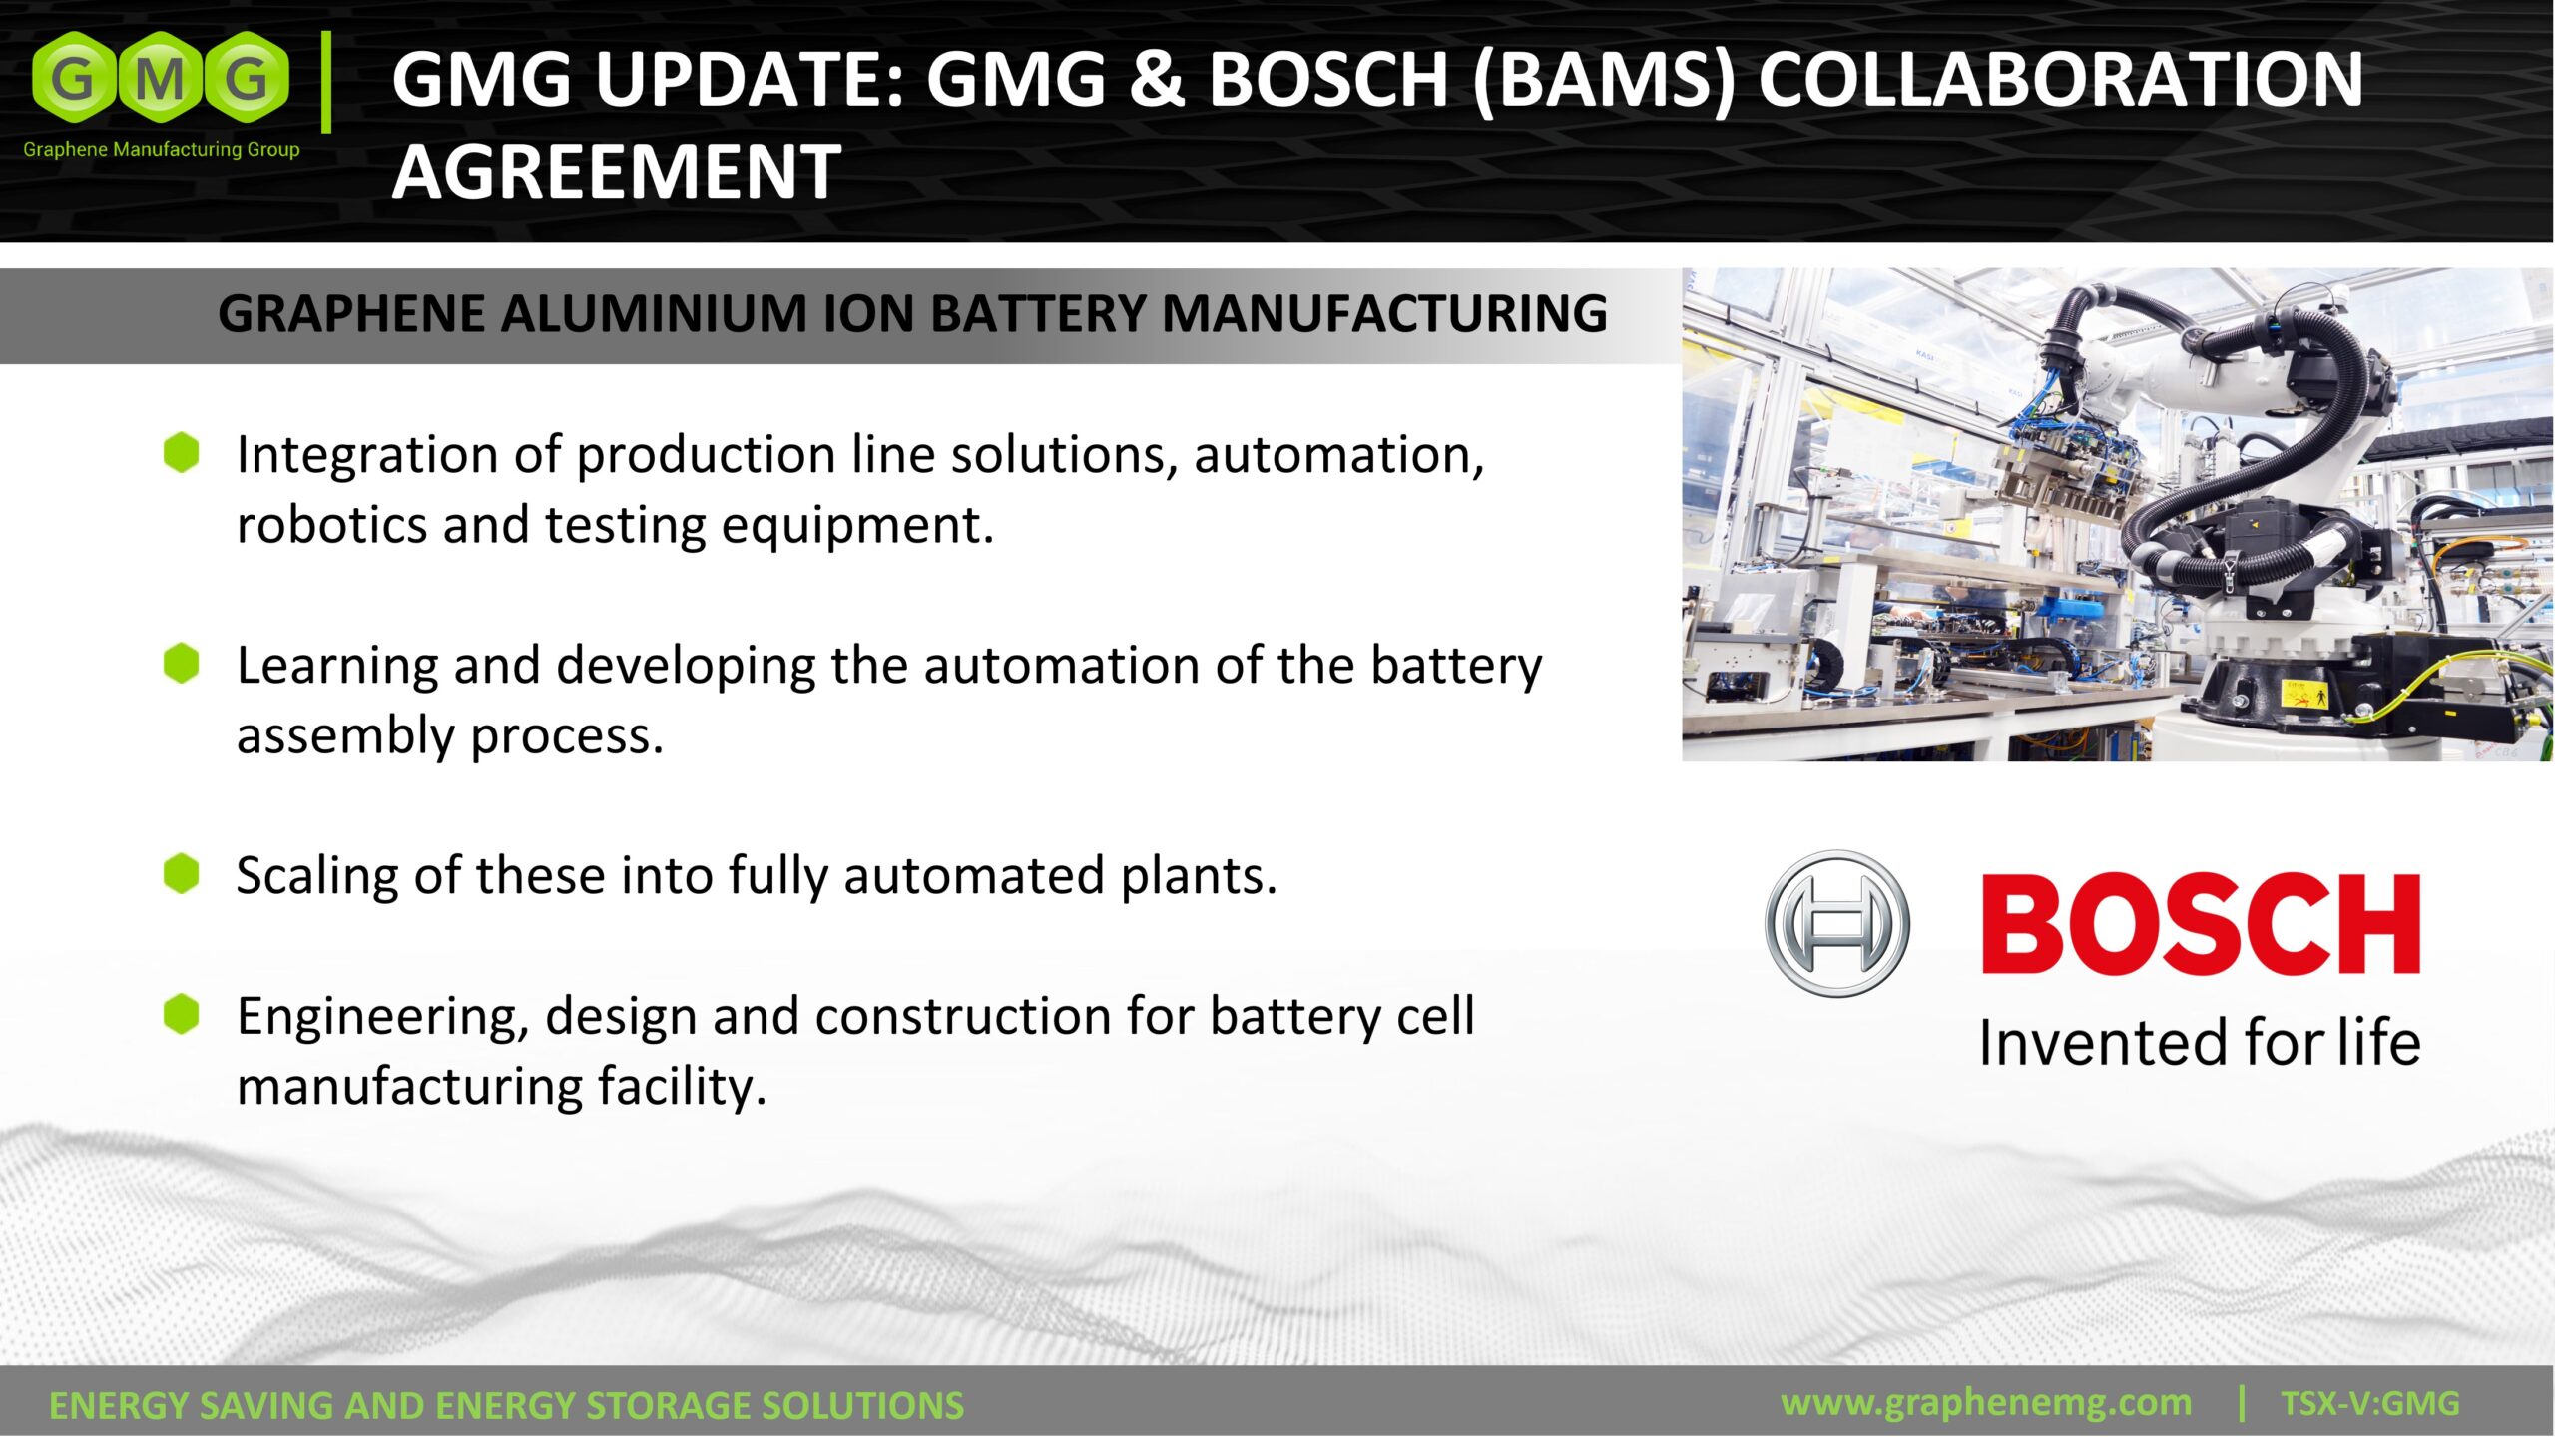 GMG AND BOSCH COLLABORATION ARRANGEMENT FOR BOSCH TO DESIGN AND DELIVER GMG'S GRAPHENE BATTERY MANUFACTURING PLANT | Graphene Manufacturing Group | GMG